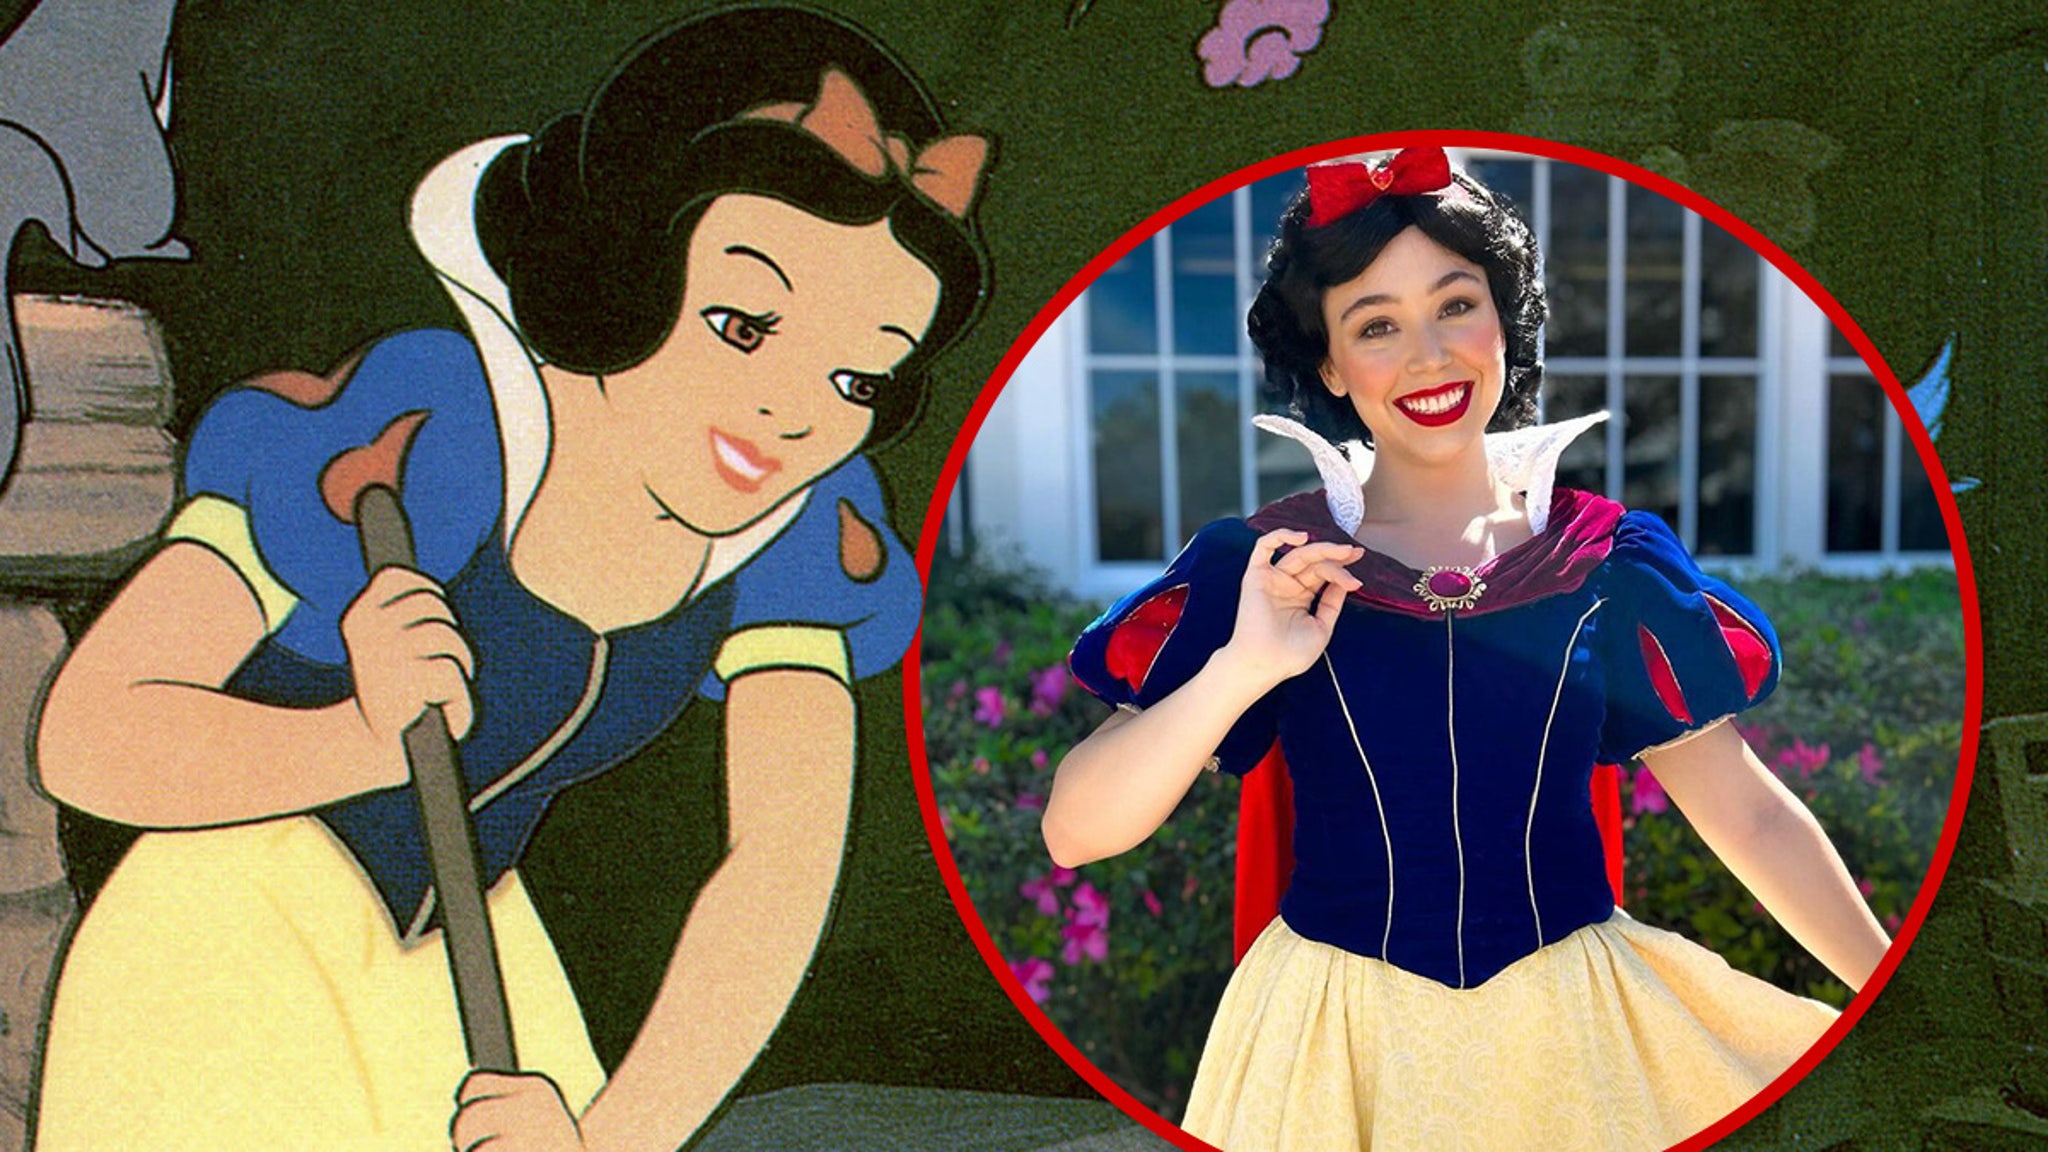 Disney Character Actor Claims She Was Fired for Posting as Snow White